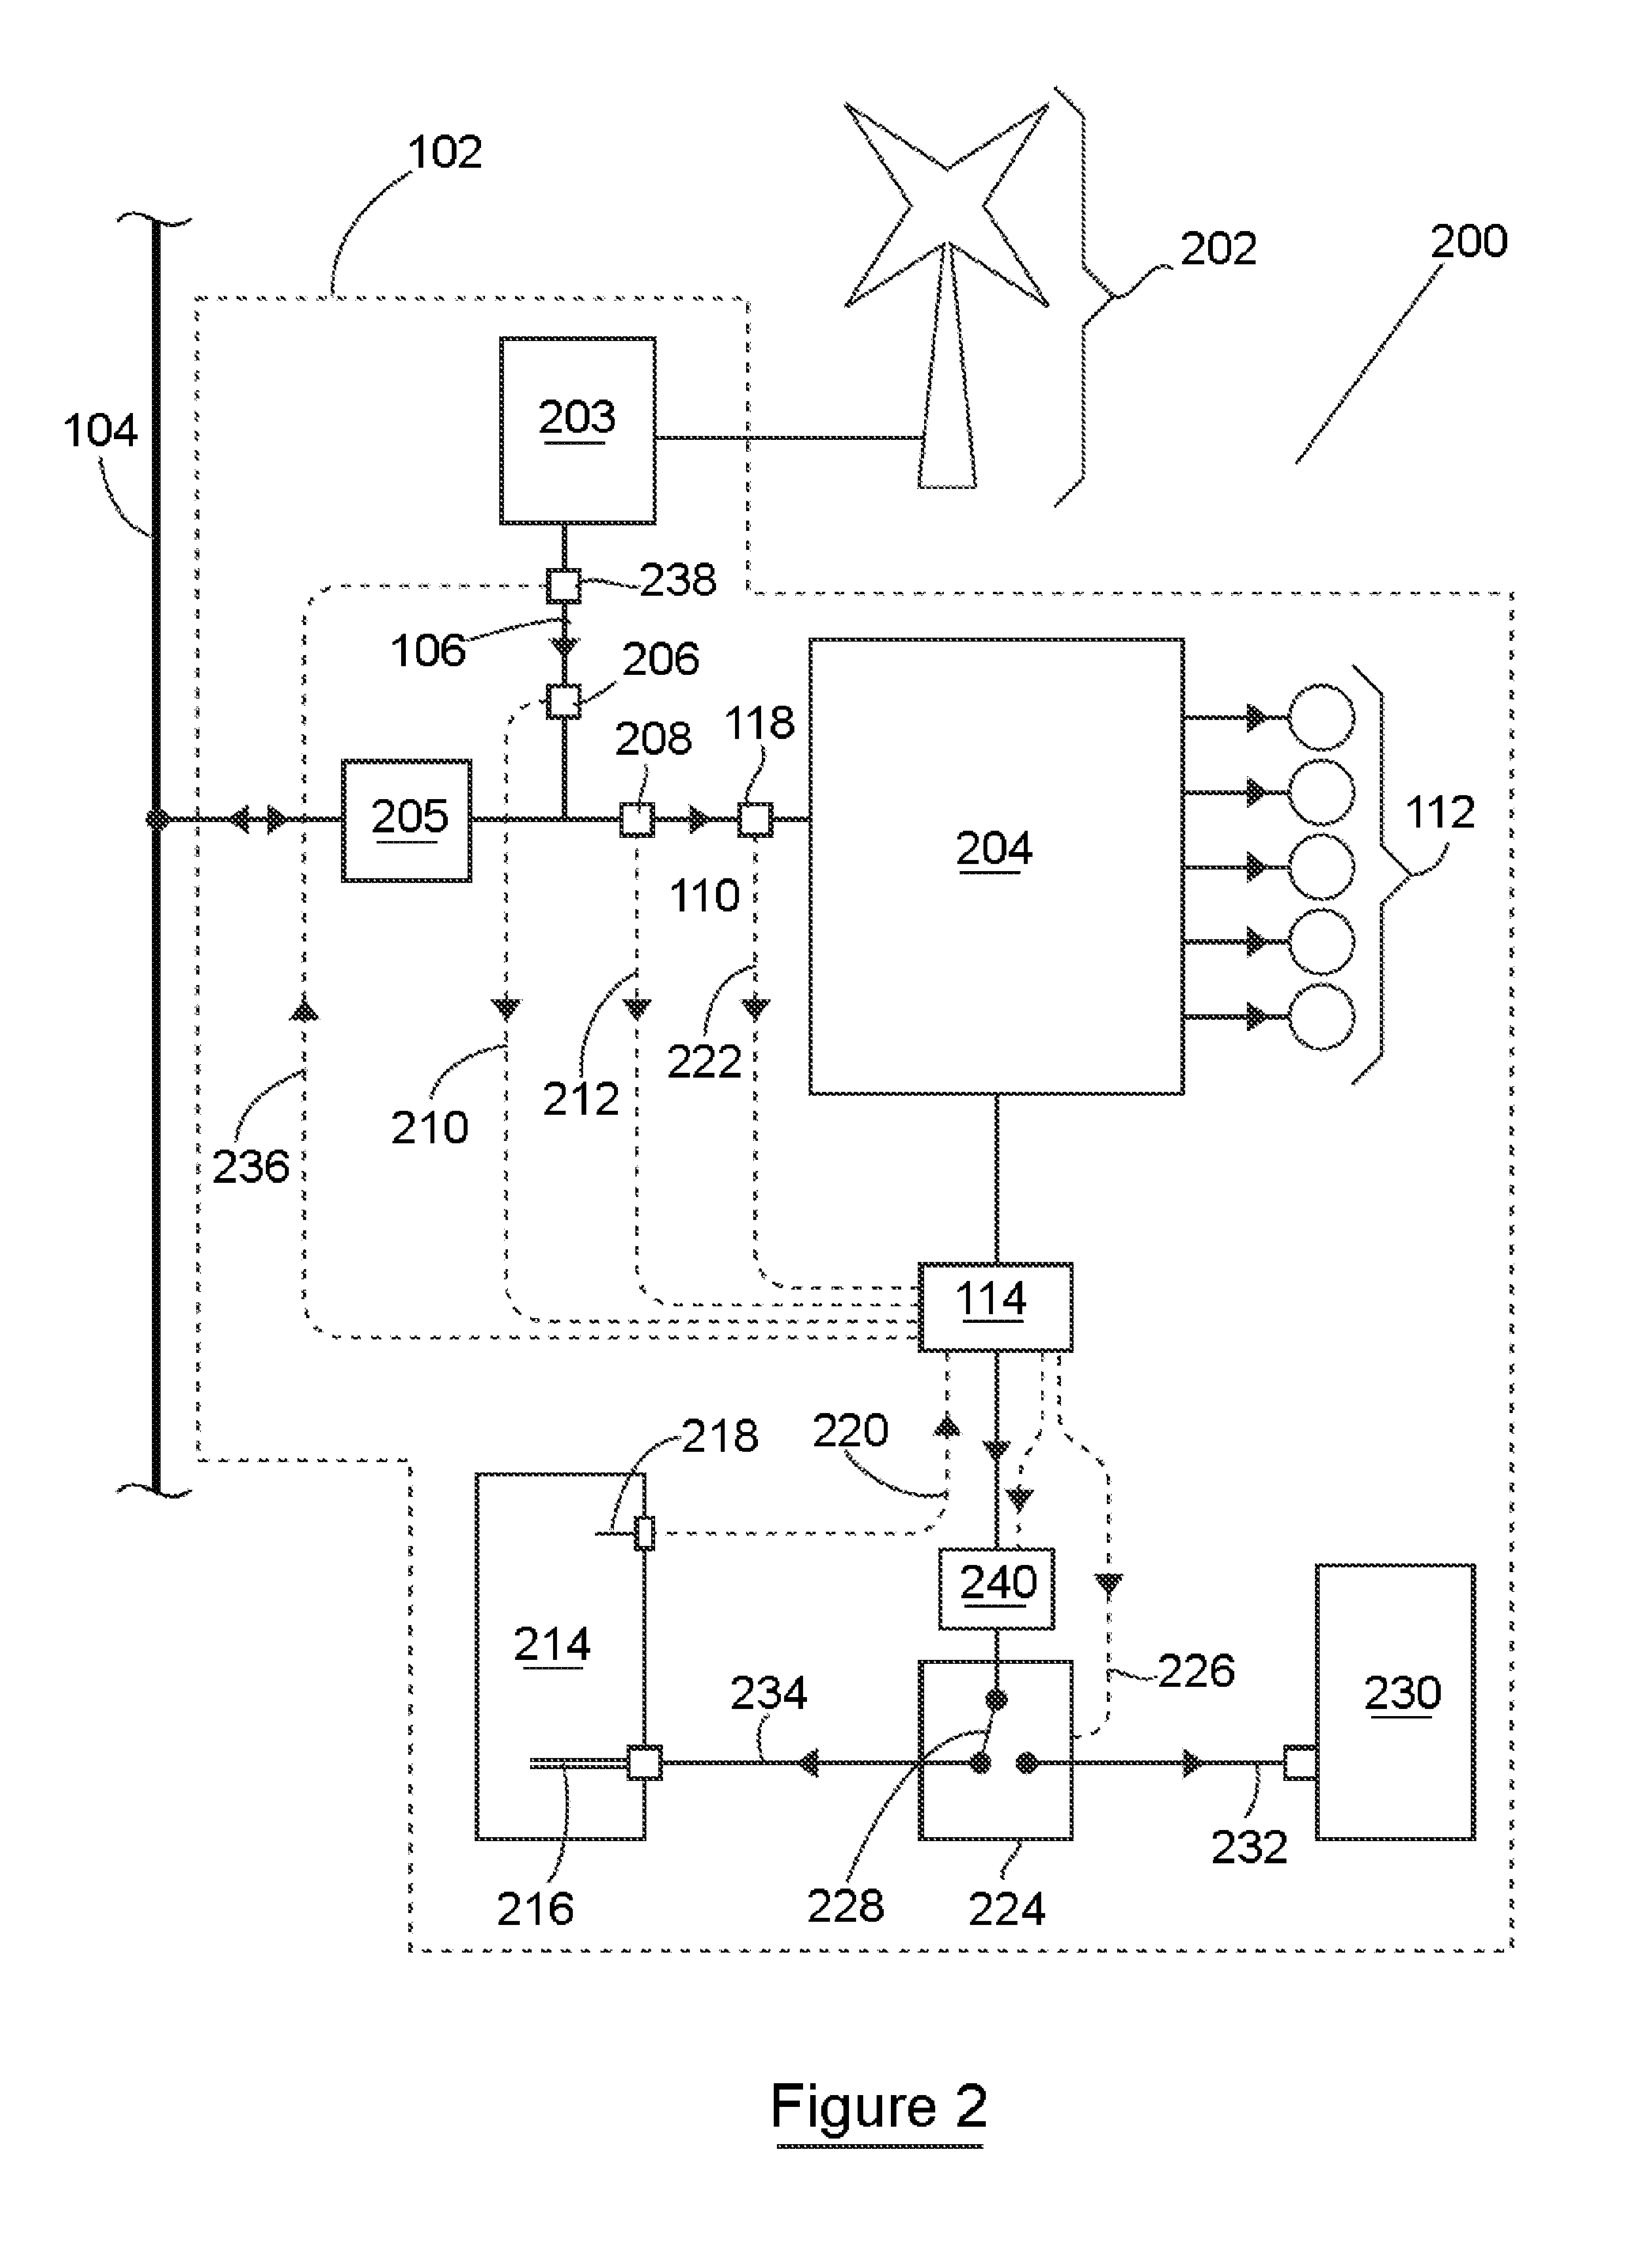 Method and system for managing an electrical load of a user facility based on locally measured conditions of an electricity supply grid